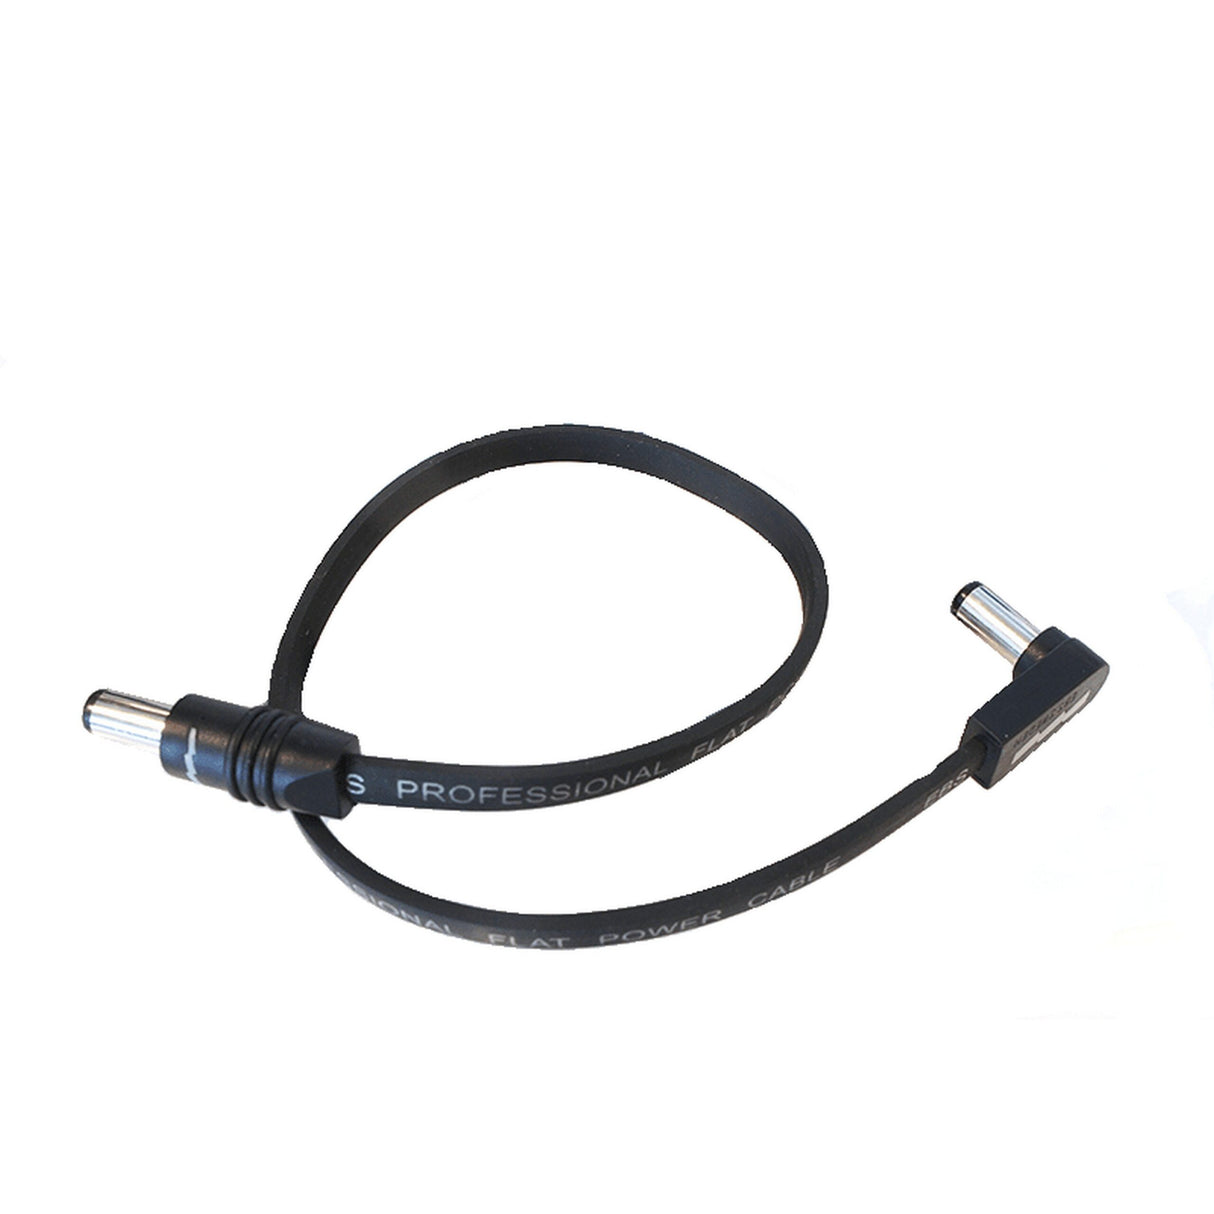 EBS DC1-38 90/0 Flat Power Cable, 38 Centimeters